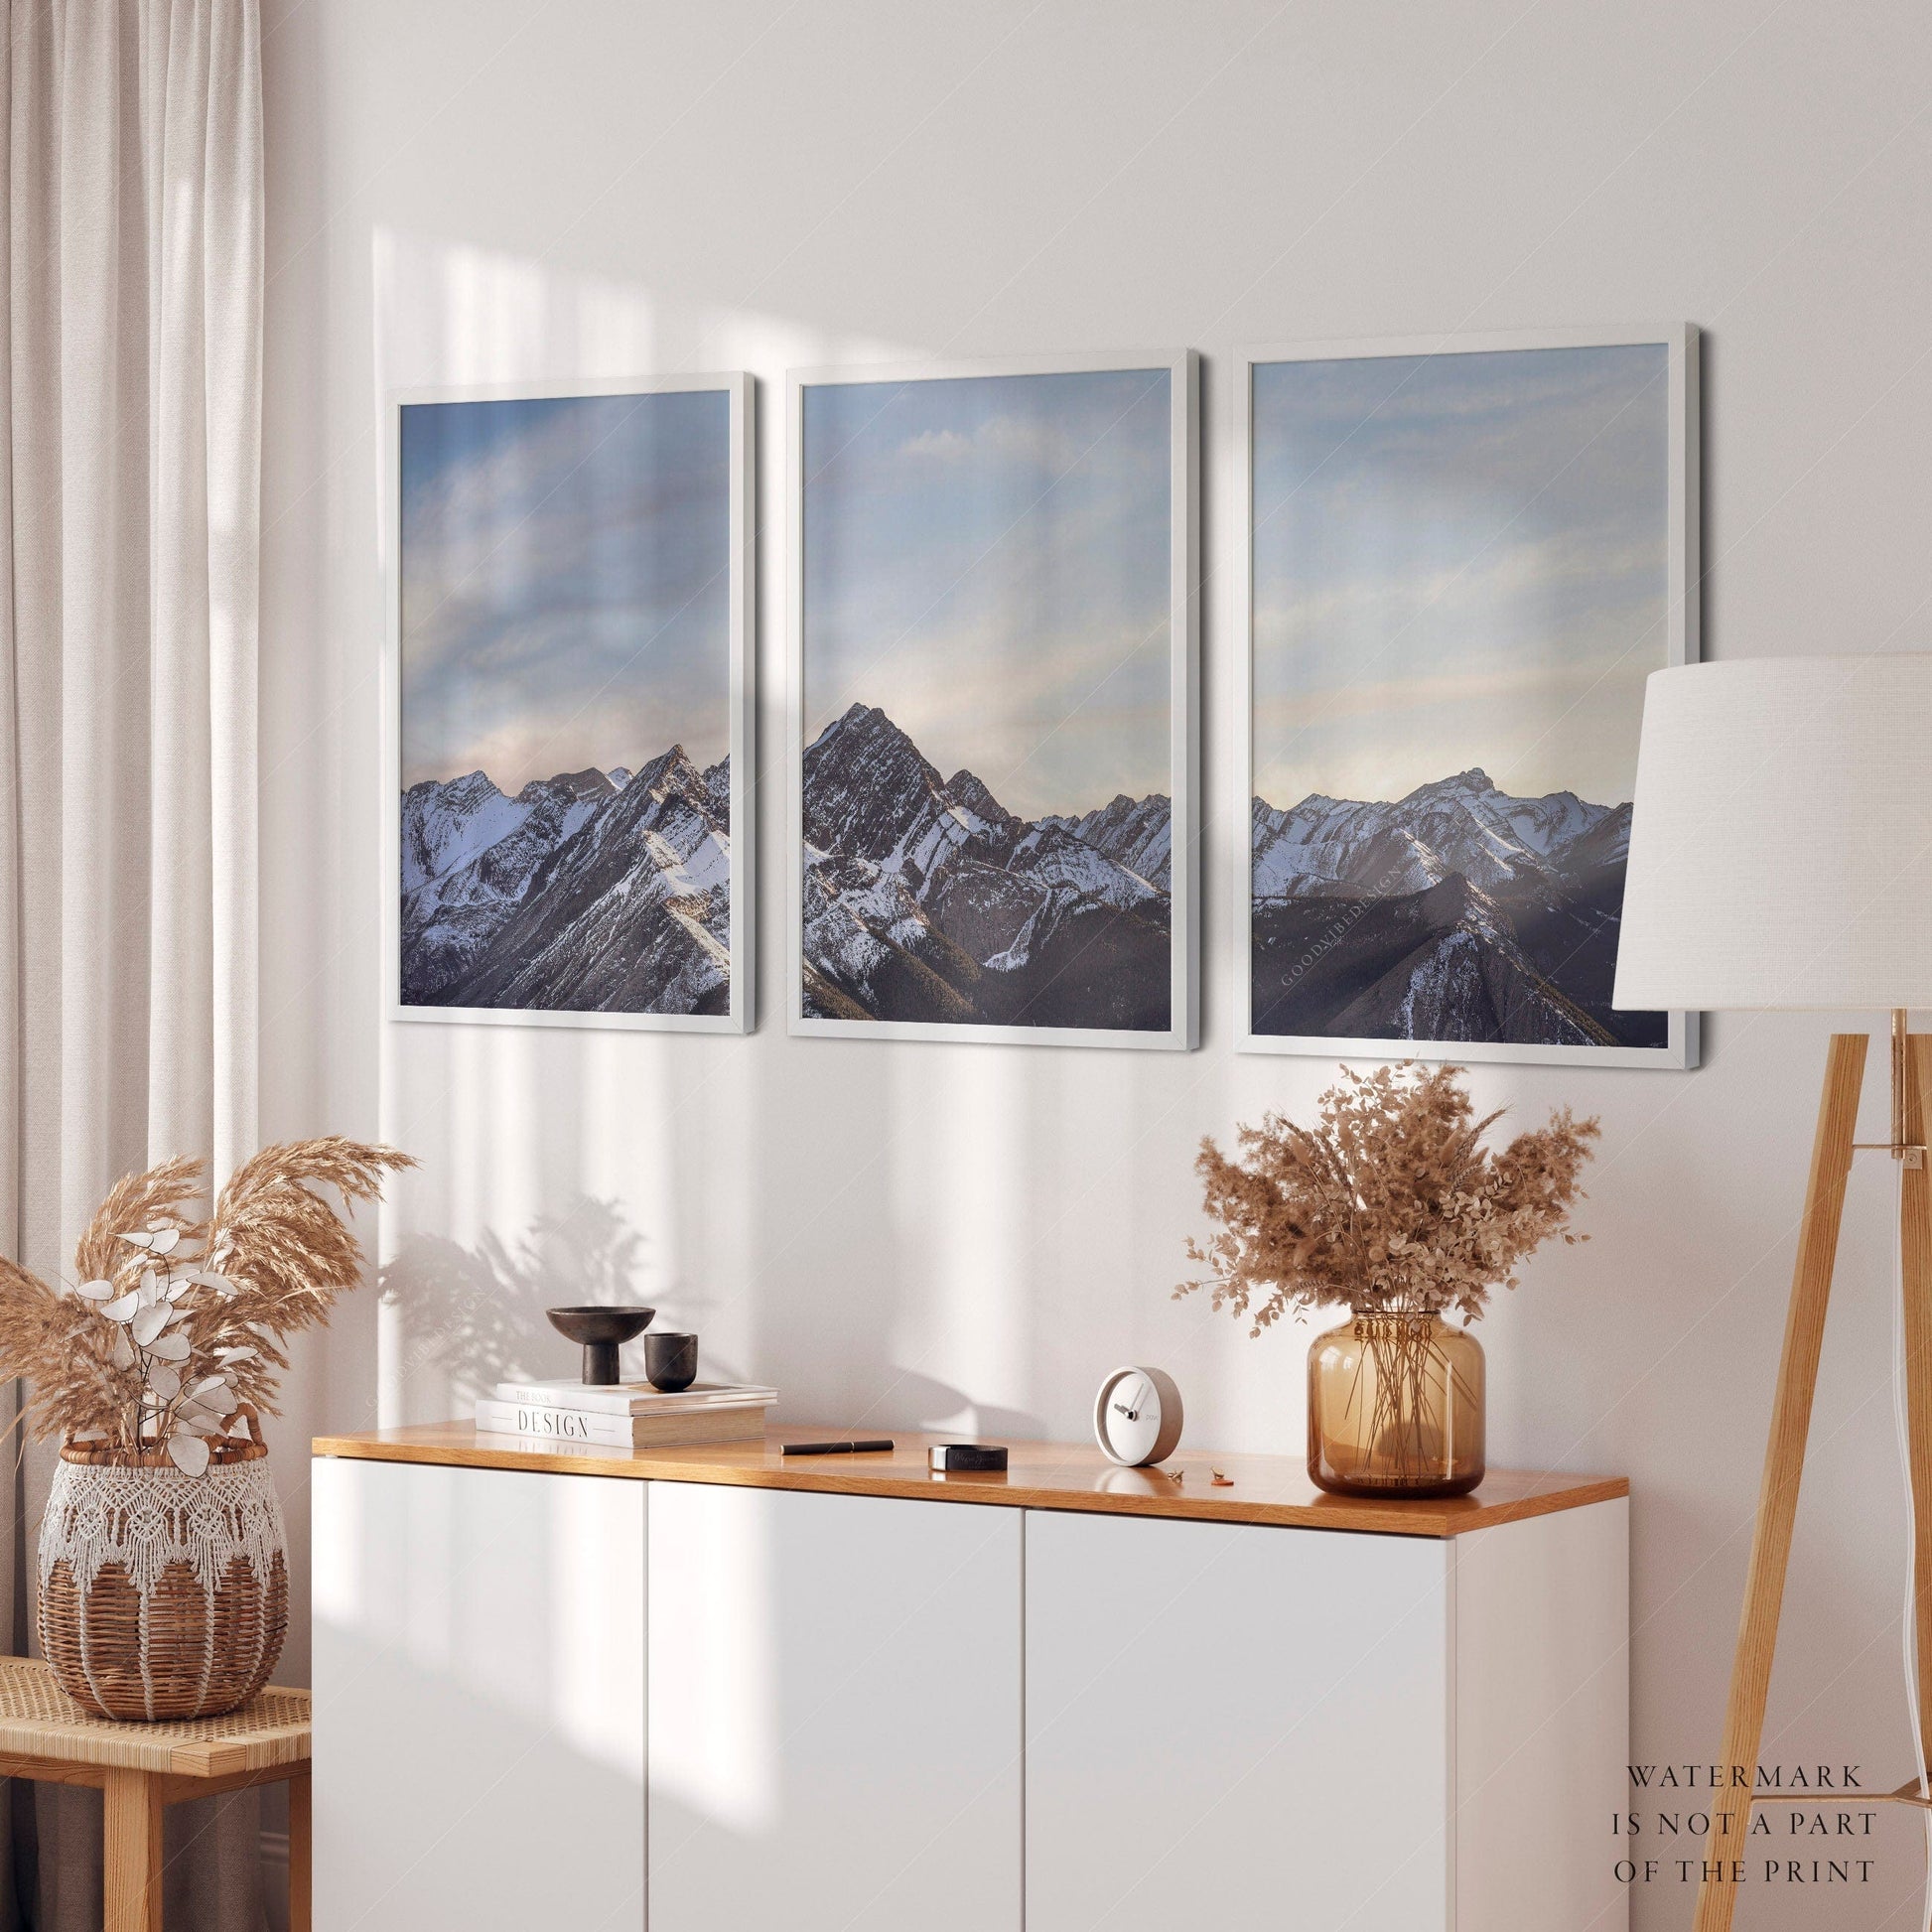 Home Poster Decor Set of 3 Mountain print, Mountain wall art, Above bed decor, Bedroom print, Nature set, Living room, Nordic landscape, Snow Forest, Iceland